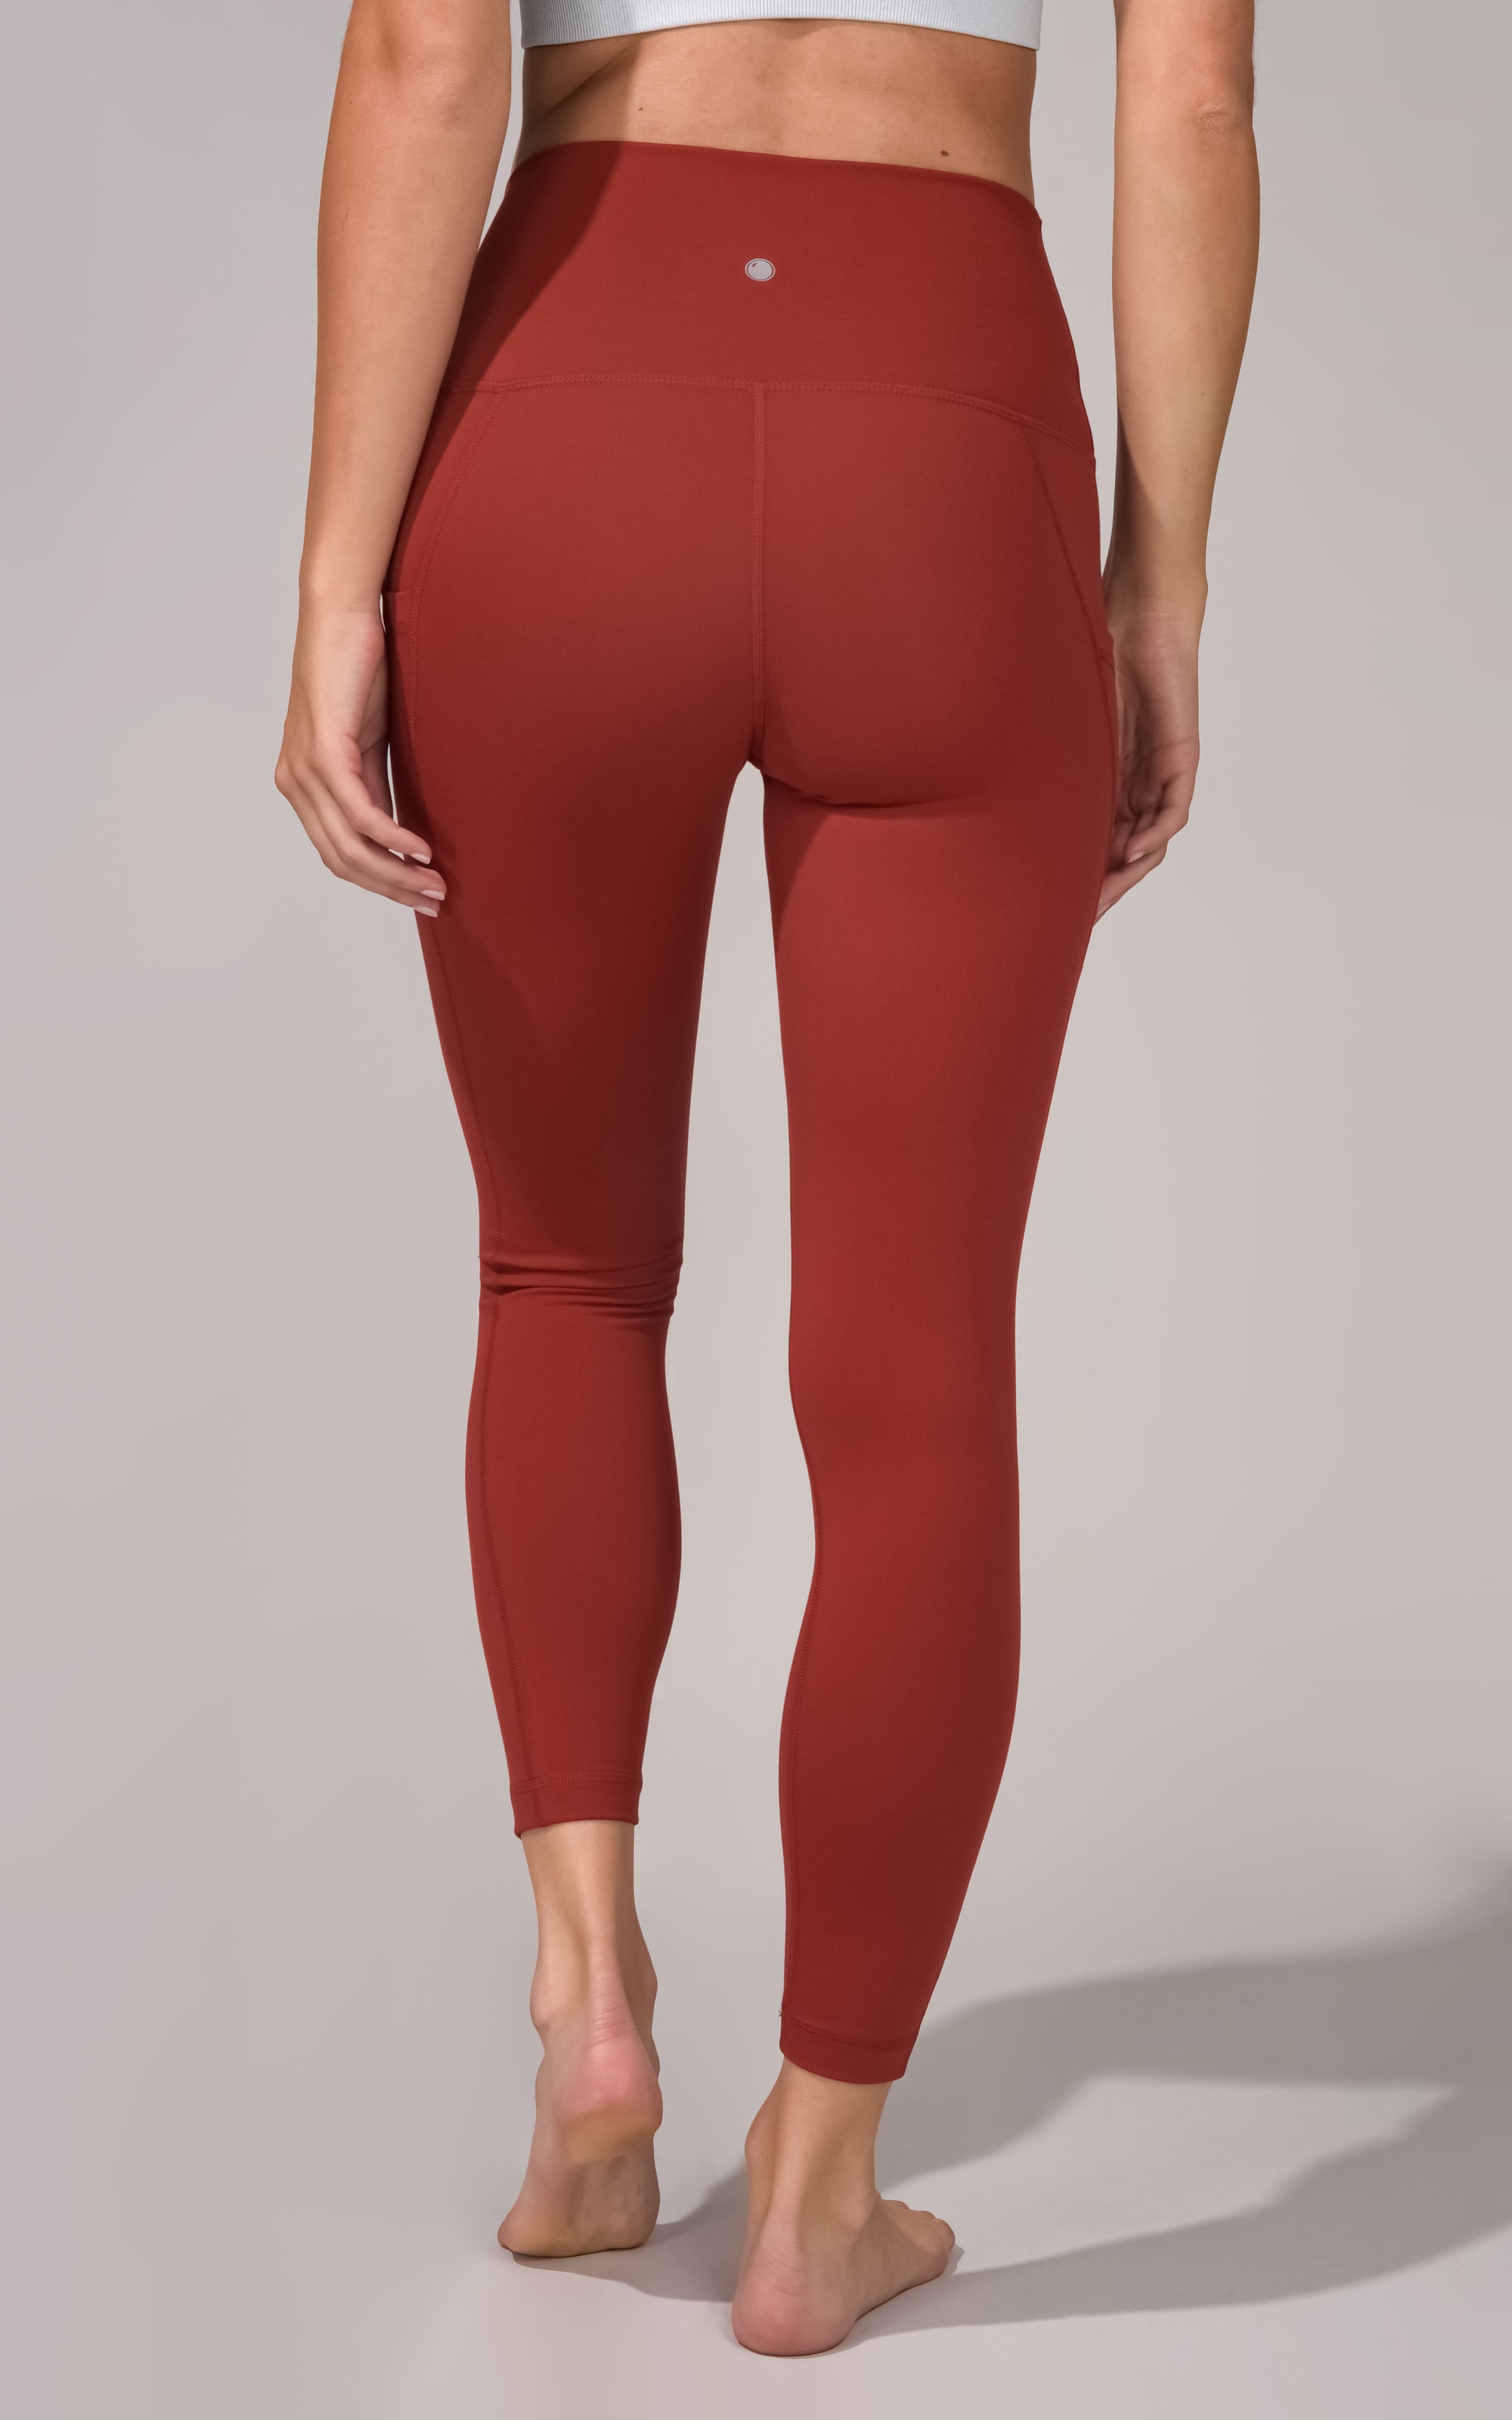 Yogalicious Red Athletic Leggings for Women